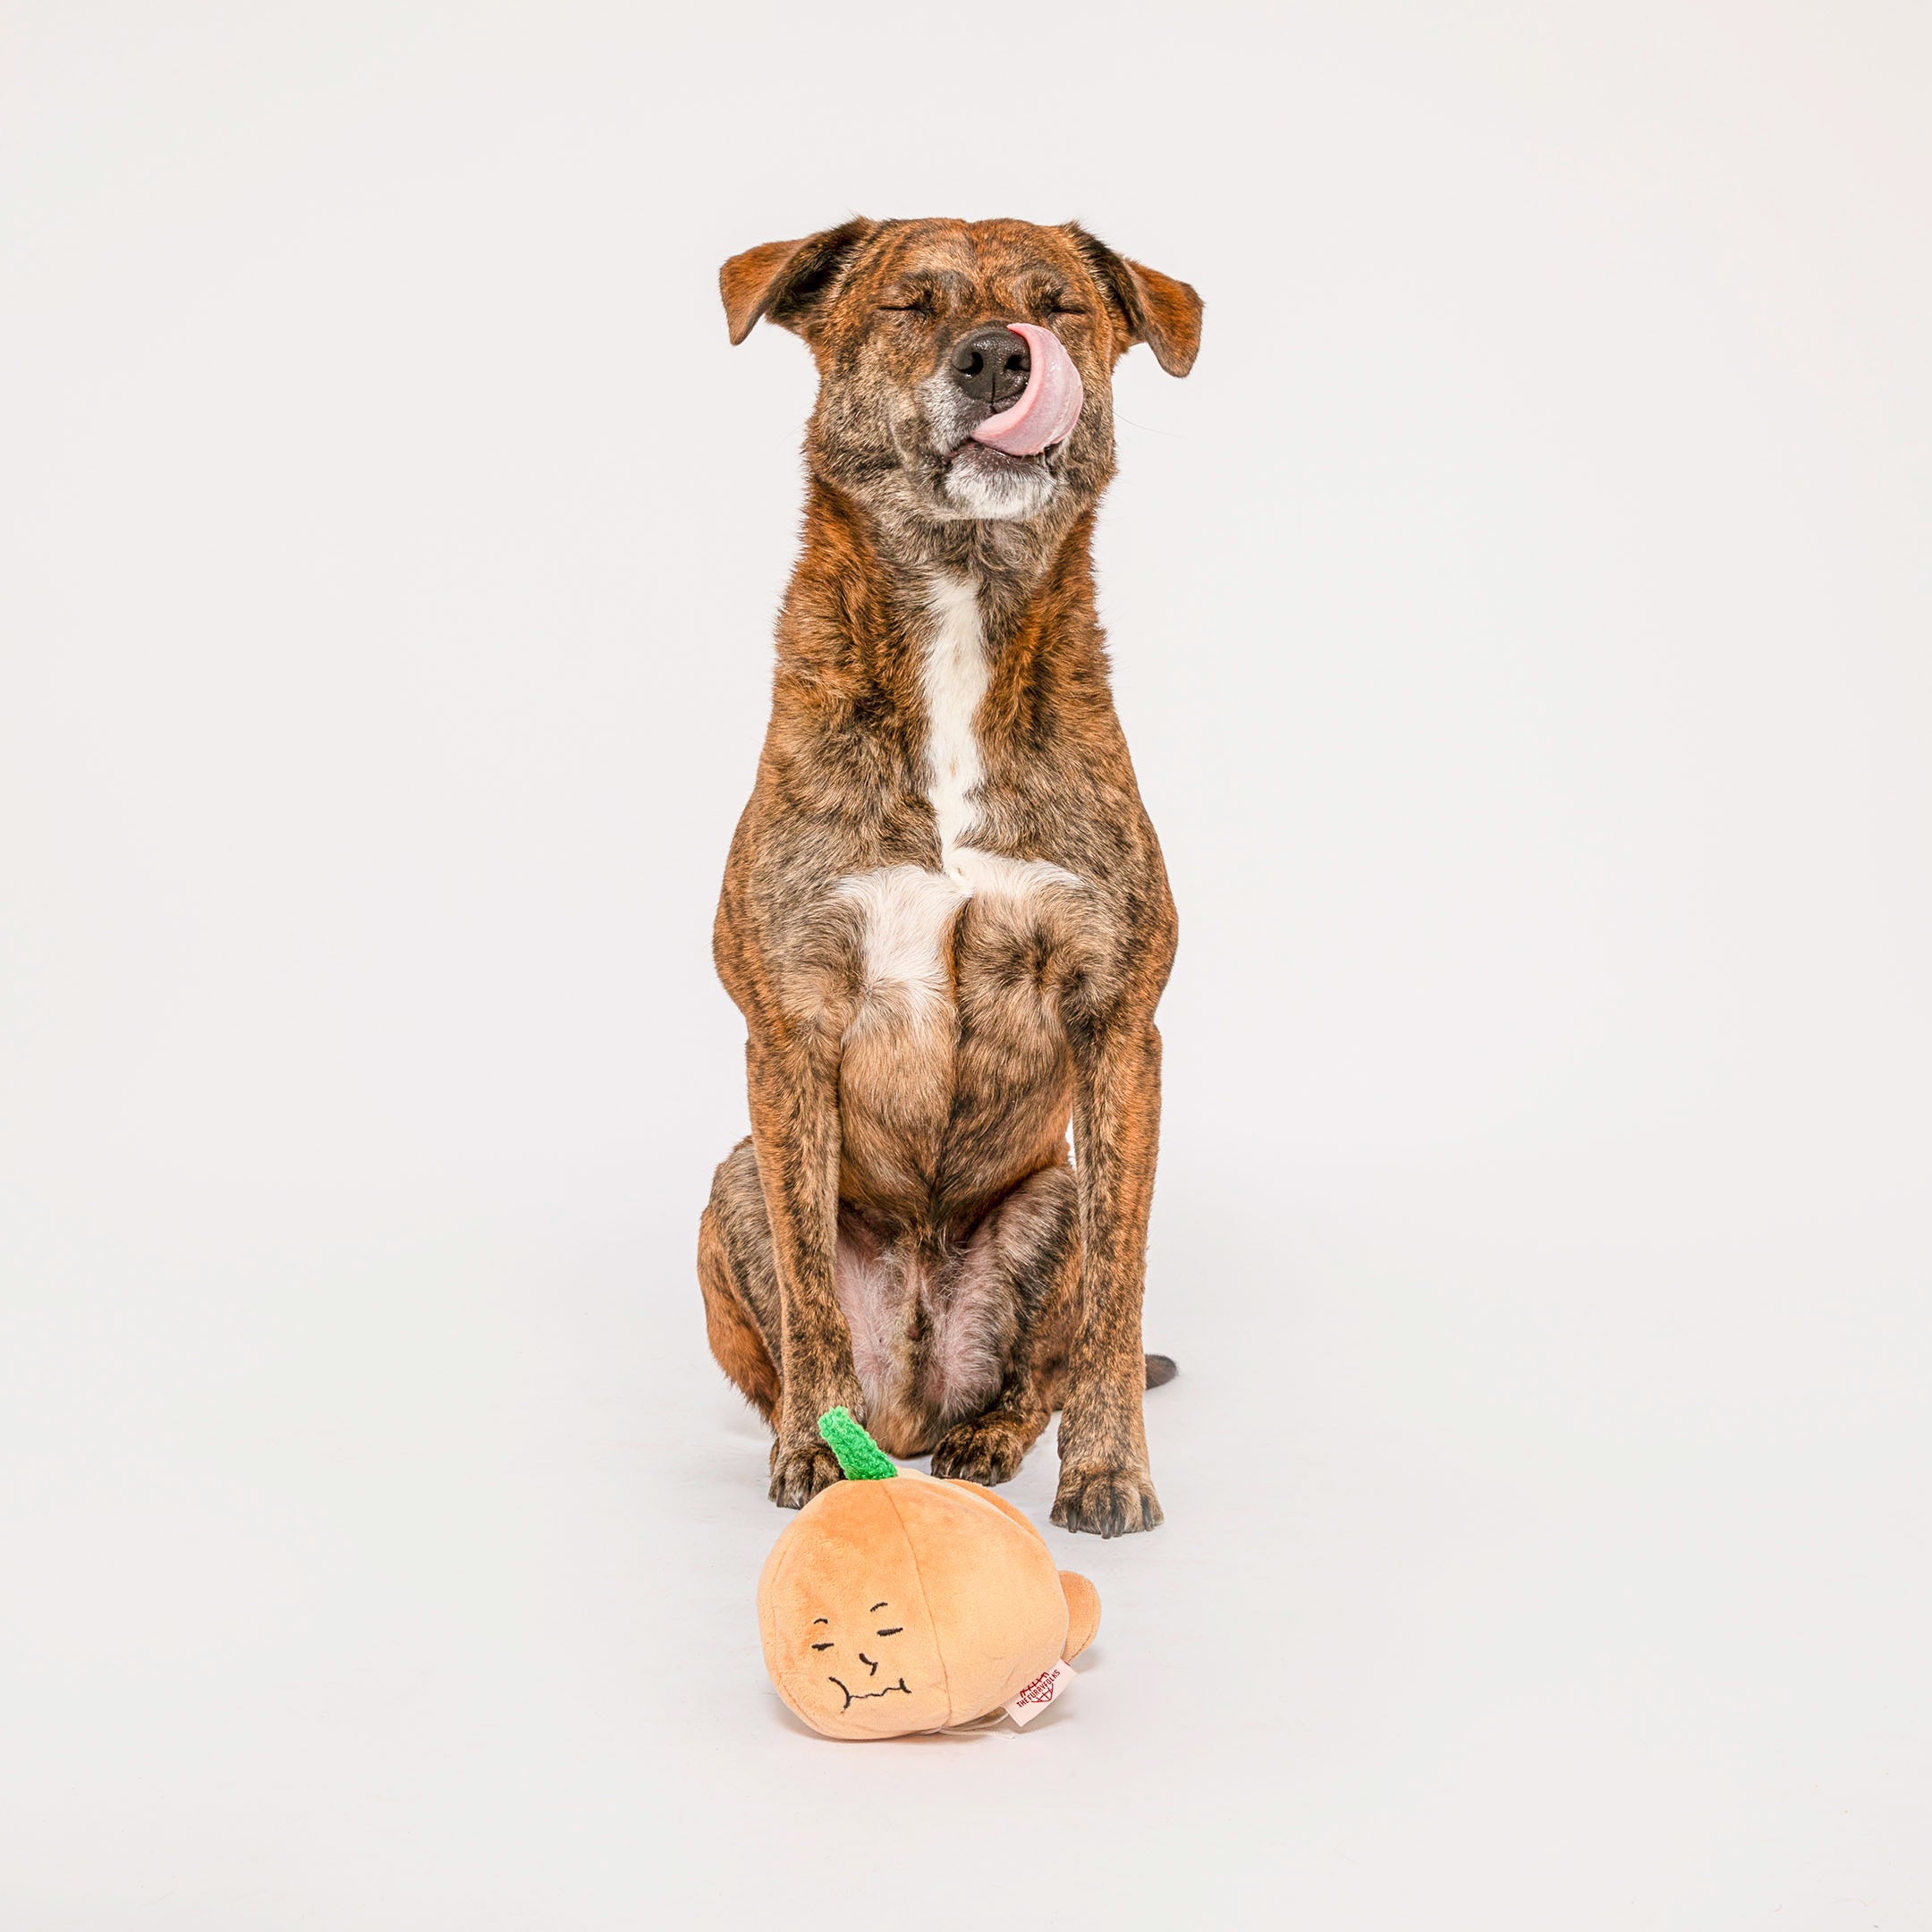 Brindle dog playfully licking its nose with a plush yellow onion dog toy in paws, ideal for interactive nosework training sessions.